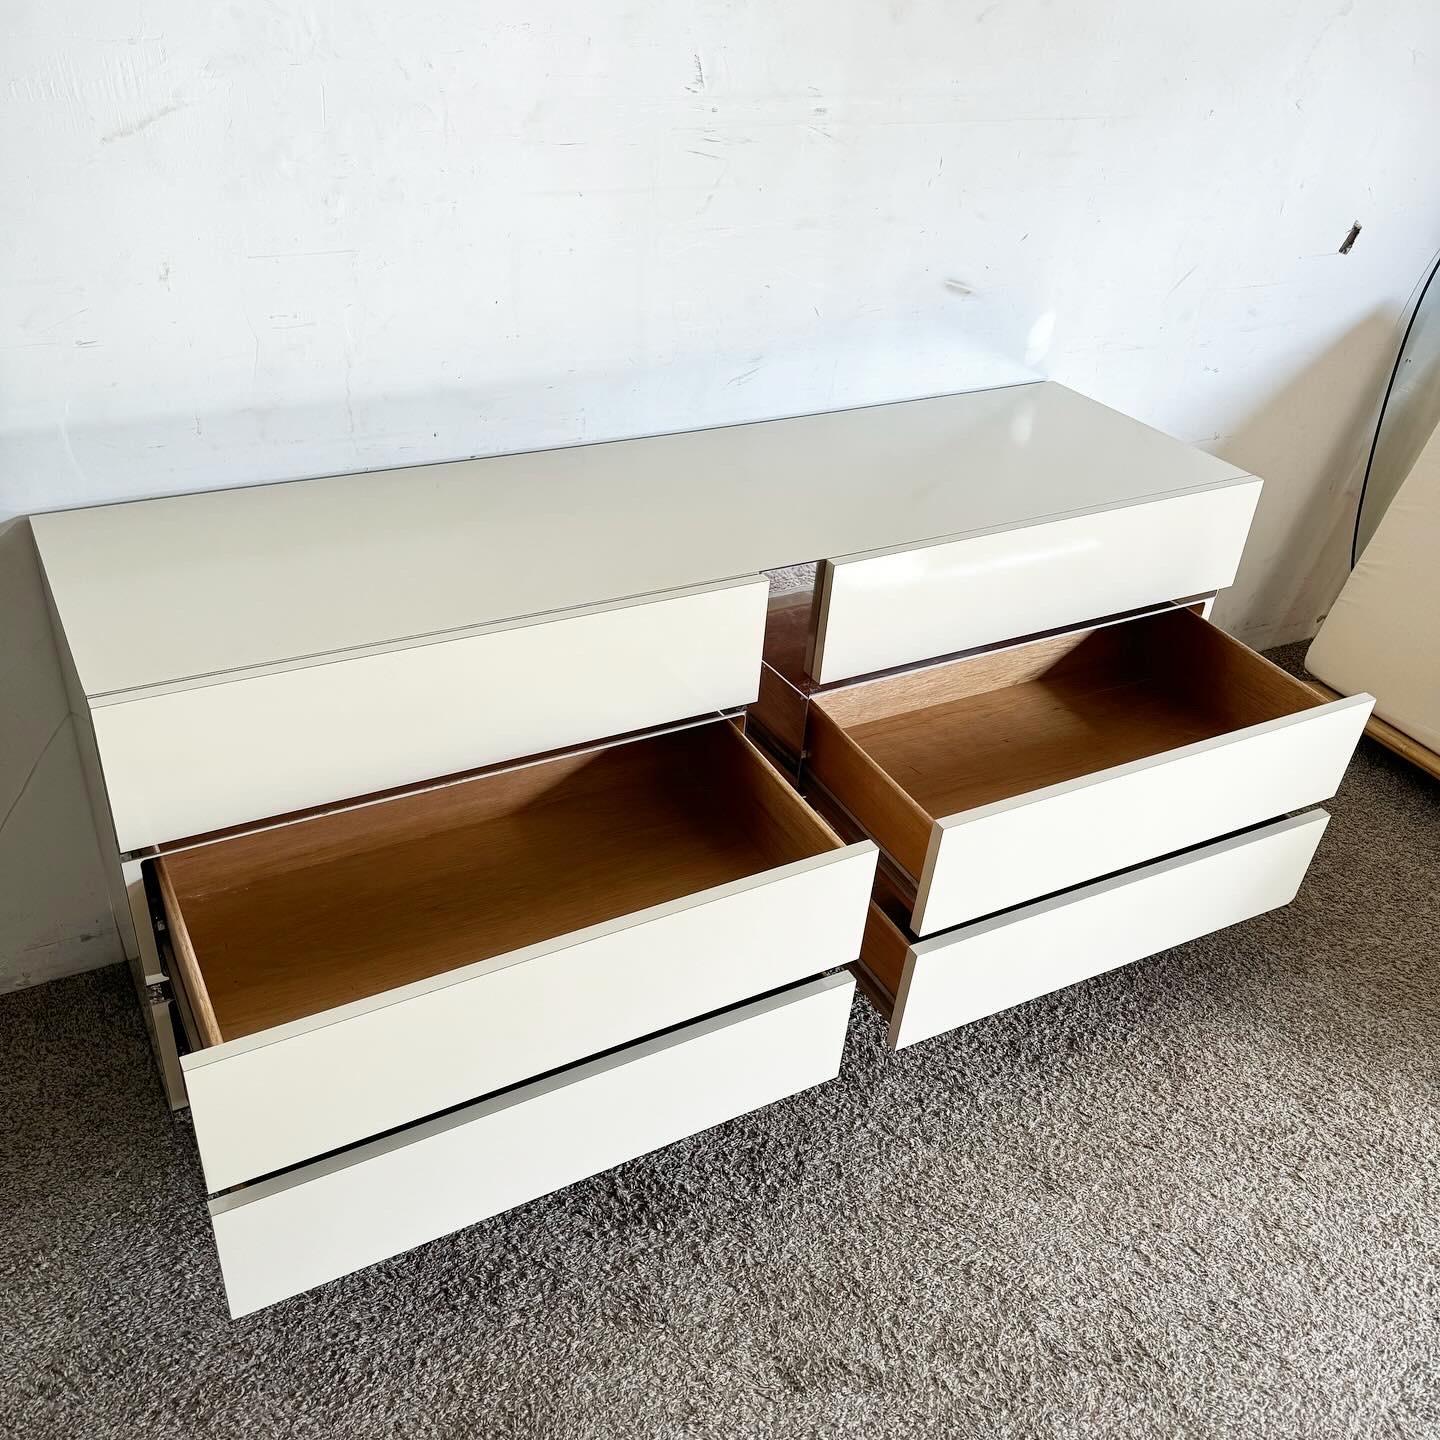 Postmodern Cream Lacquer Laminate and Glass Mirror Dresser - 6 Drawers For Sale 1